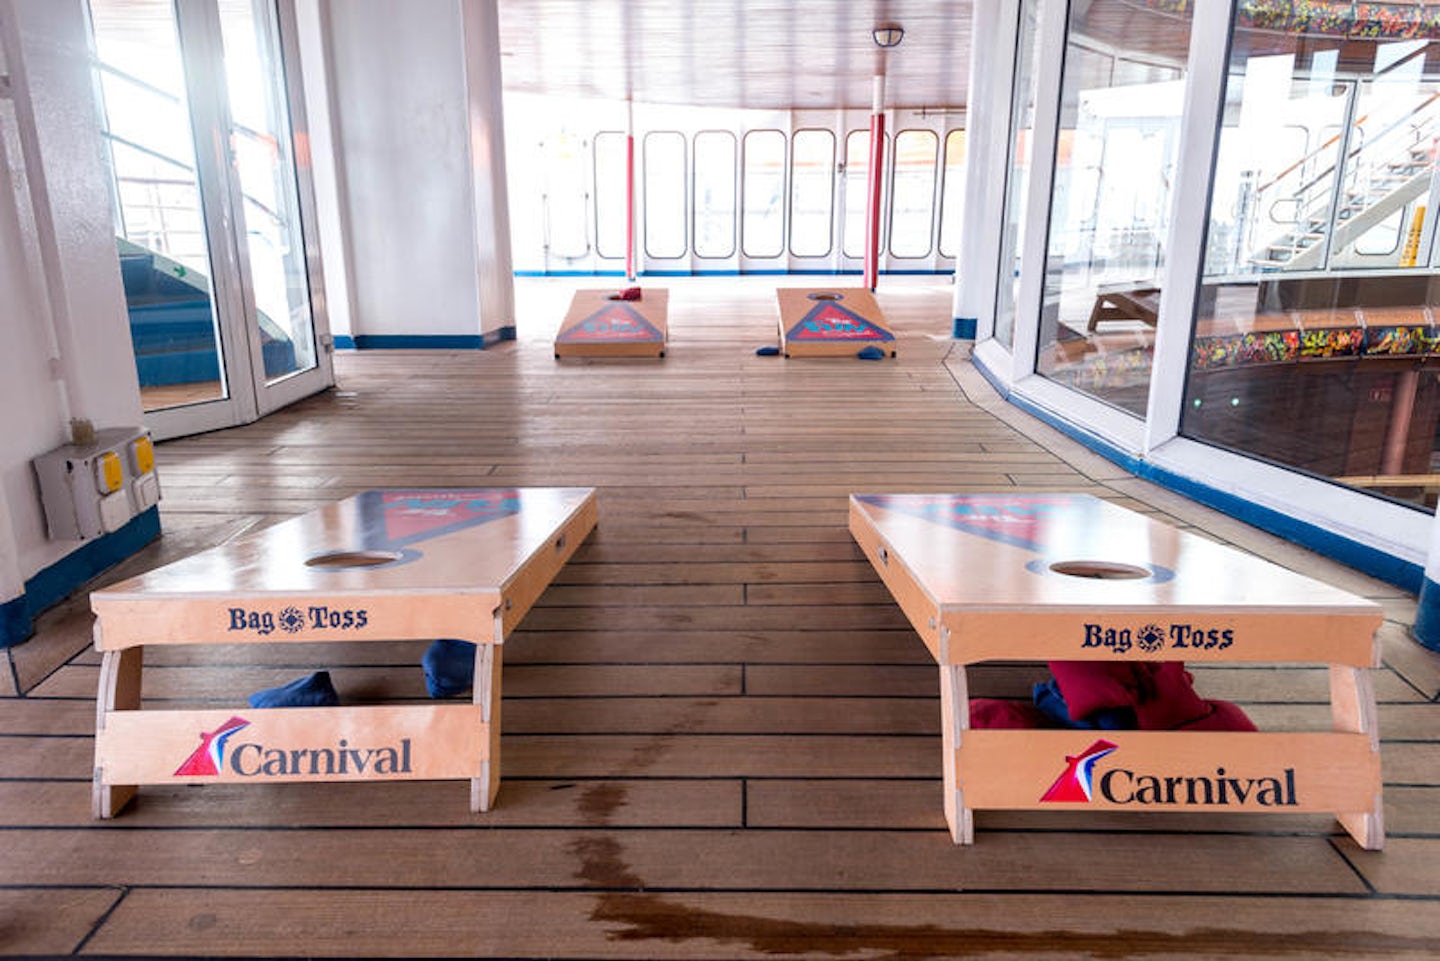 Deck Games on Carnival Paradise